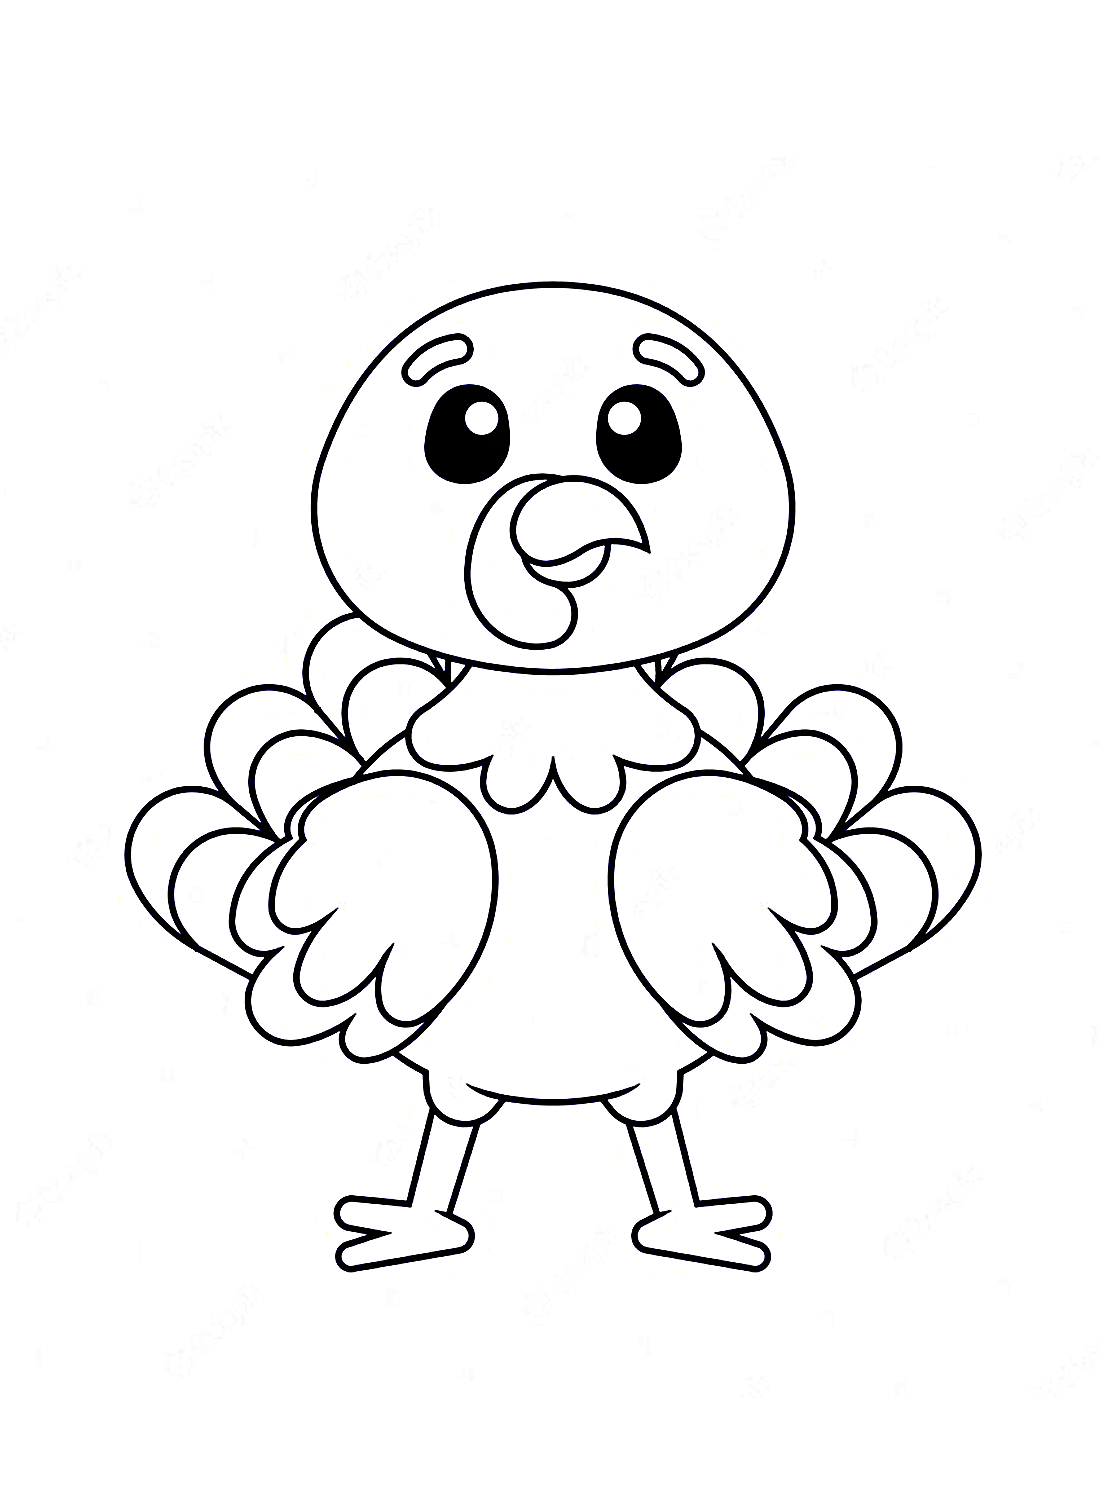 A cartoon chick Coloring Pages